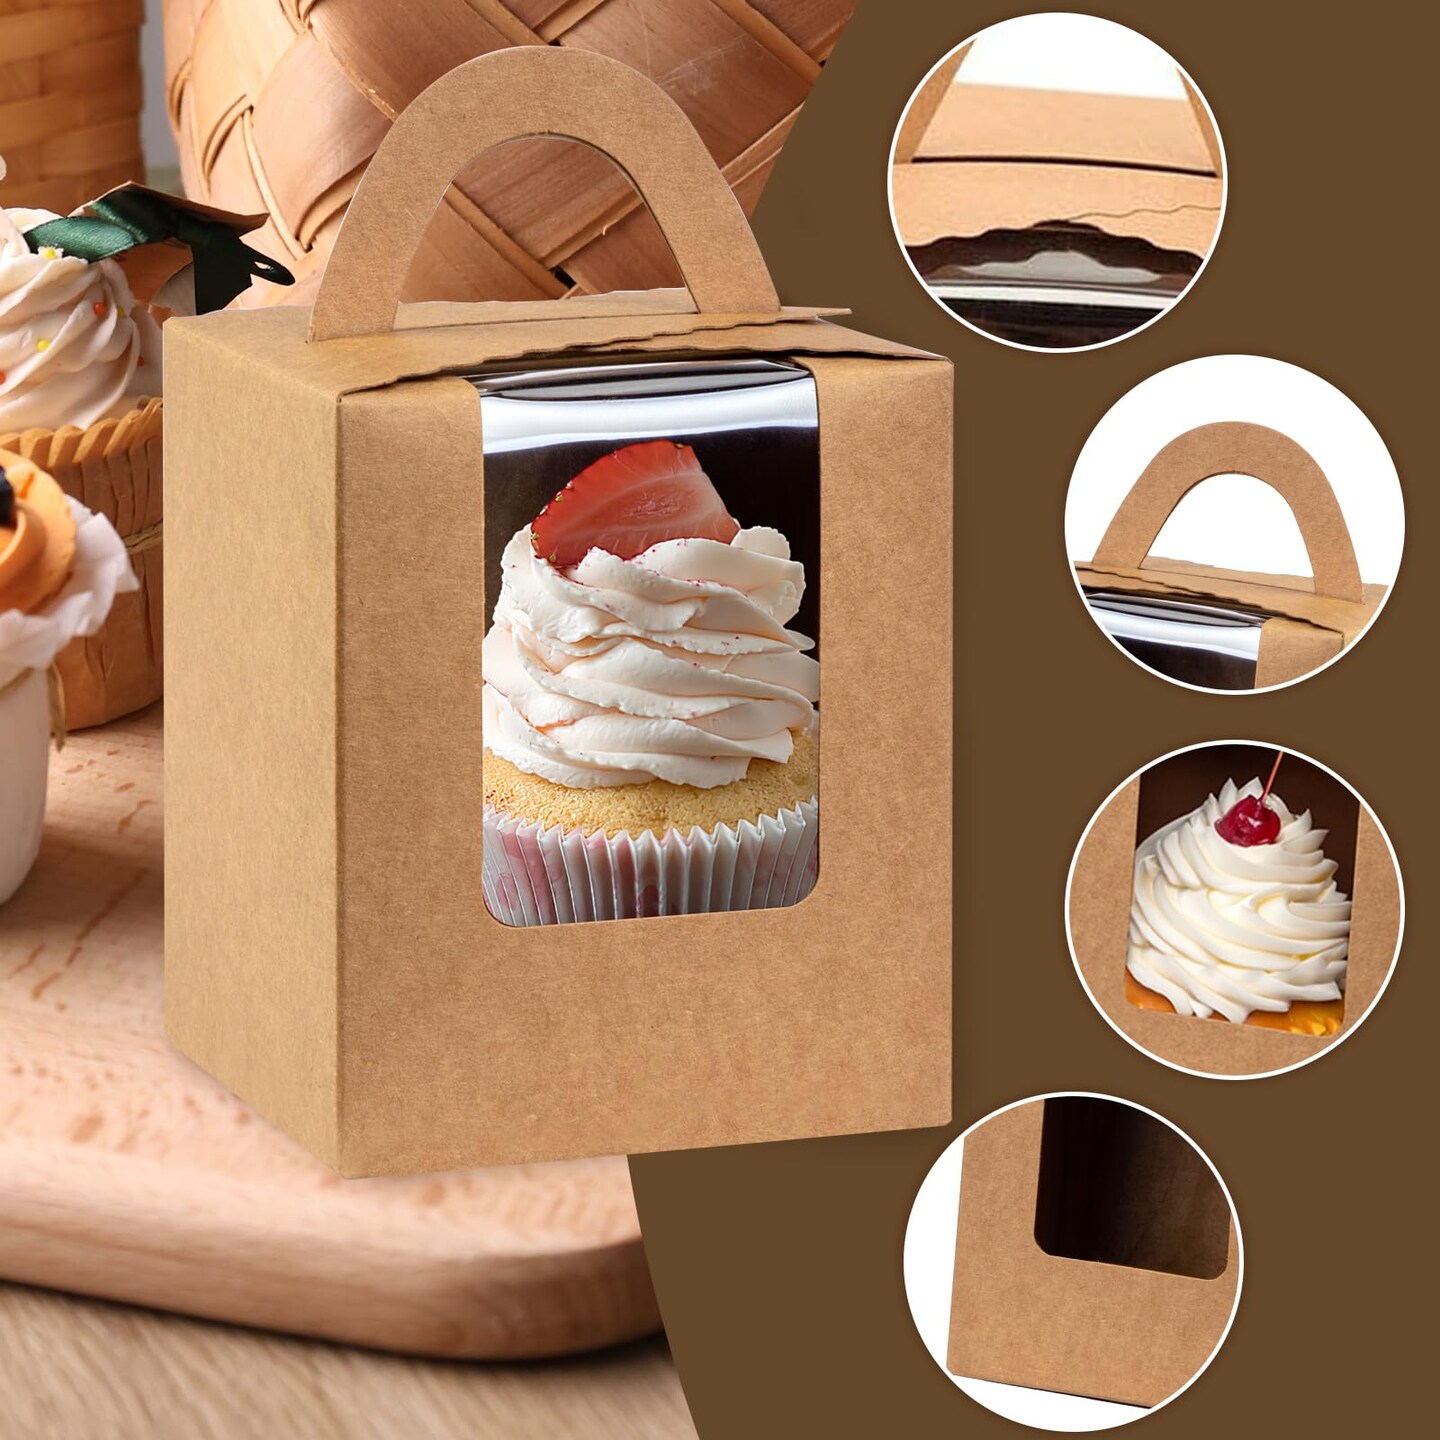 VGOODALL 60PCS Kraft Cupcake Boxes, Cupcake Carrier with Window Insert and Handle Kraft Pastry Containers Muffins Cupcake Carriers for Bakery Wrapping Party Favor Packing